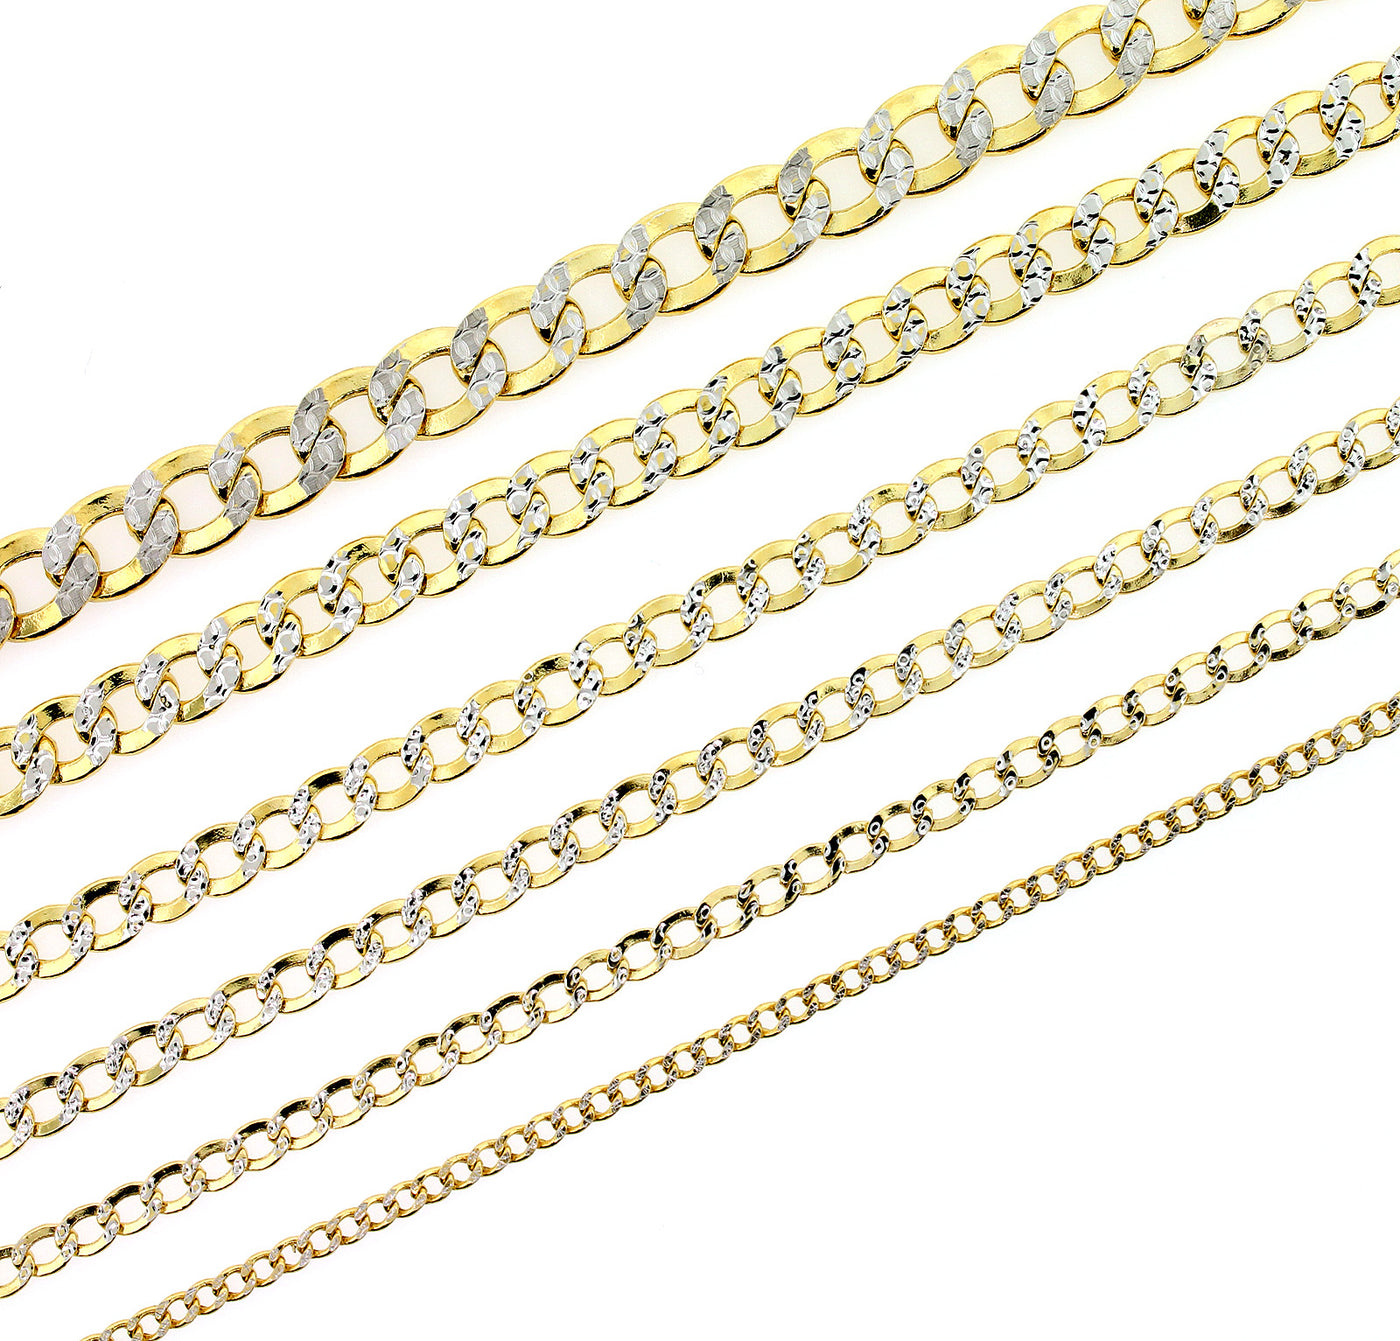 10K Yellow Gold 2mm - 6mm Diamond Cut Pave Cuban Link Chain Necklace 14" - 30"